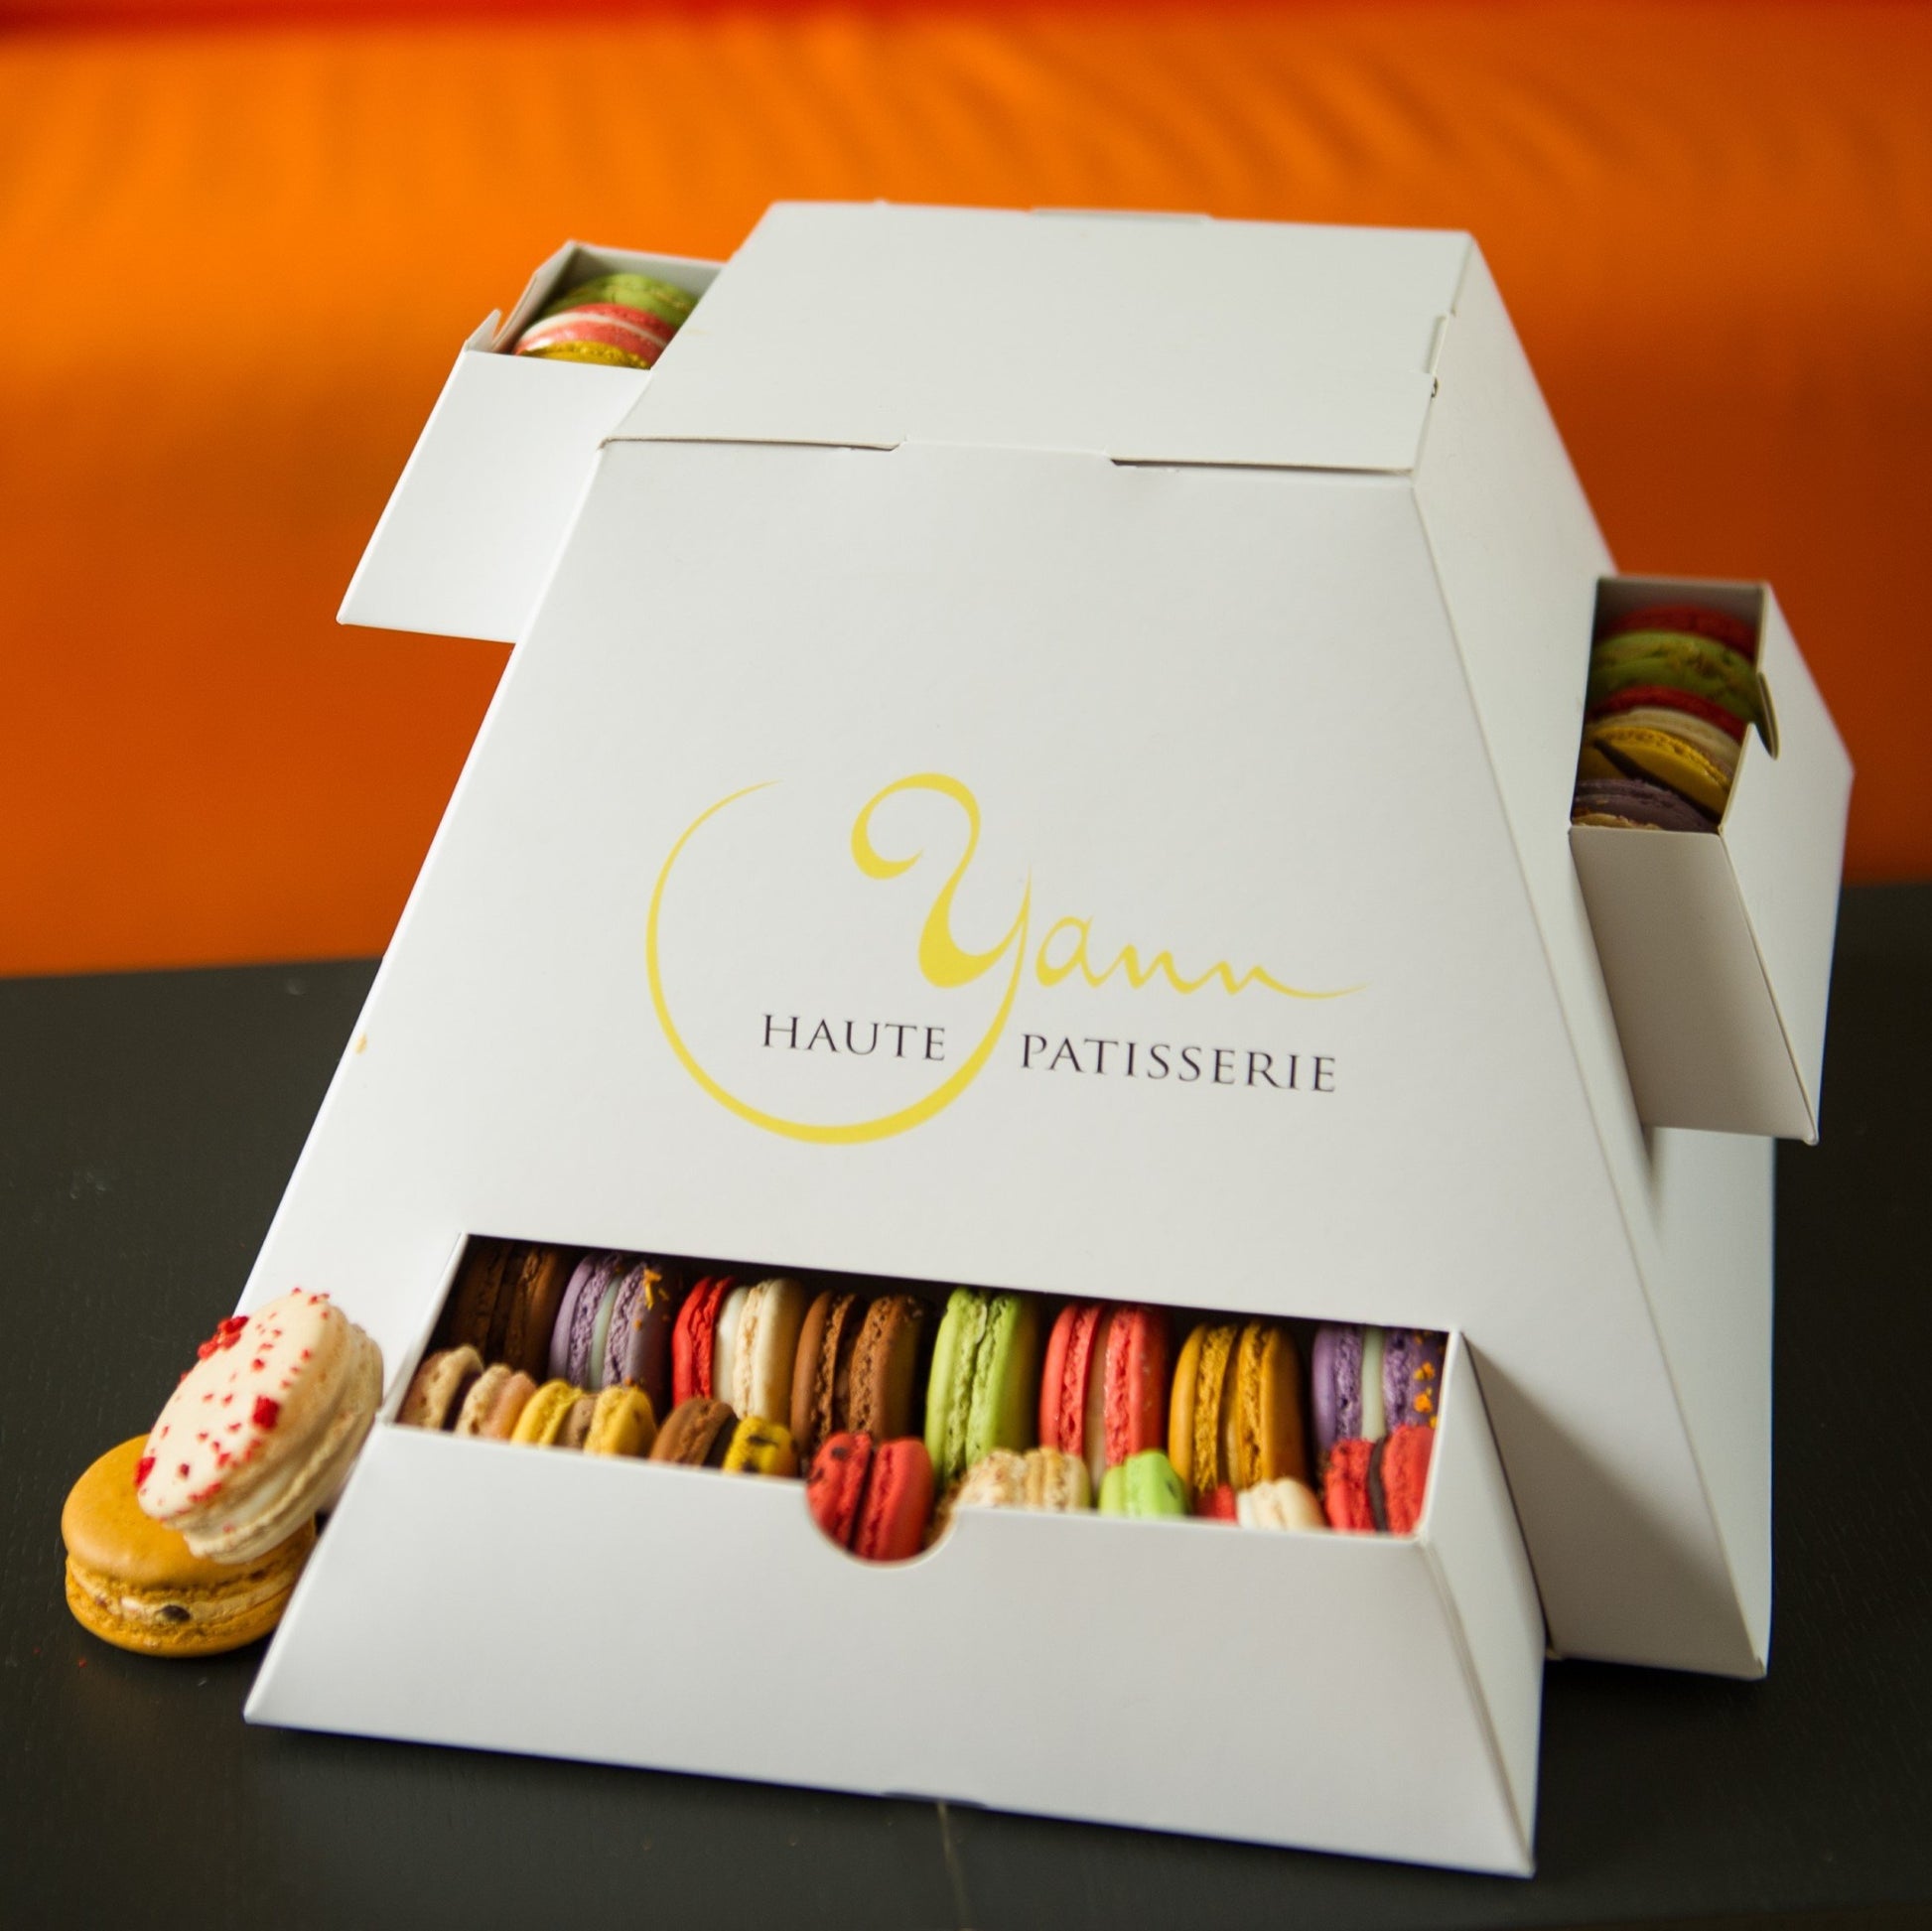 A pyramid of macarons for the best gift ever from Yann Haute Patisserie! Yann Haute Patisserie, authentic French bakery for the best desserts, cakes, croissants and macarons in this happy yellow house pastry shop. 